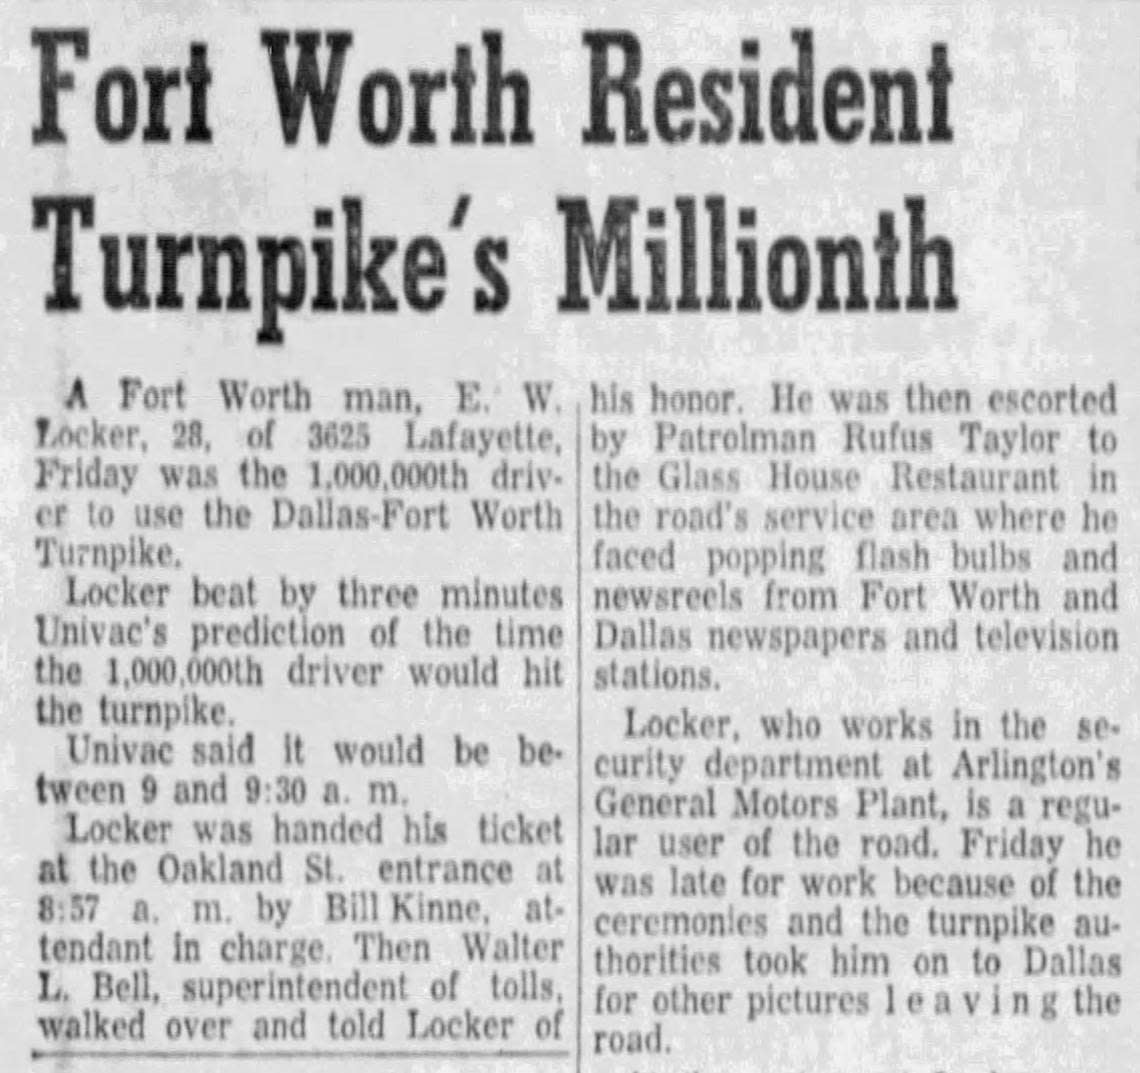 A Nov. 9, 1957, story in the Fort Worth Star-Telegram reporting the 1 millionth driver to enter the new Dallas-Fort Worth Turnpike, about two months after it opened.